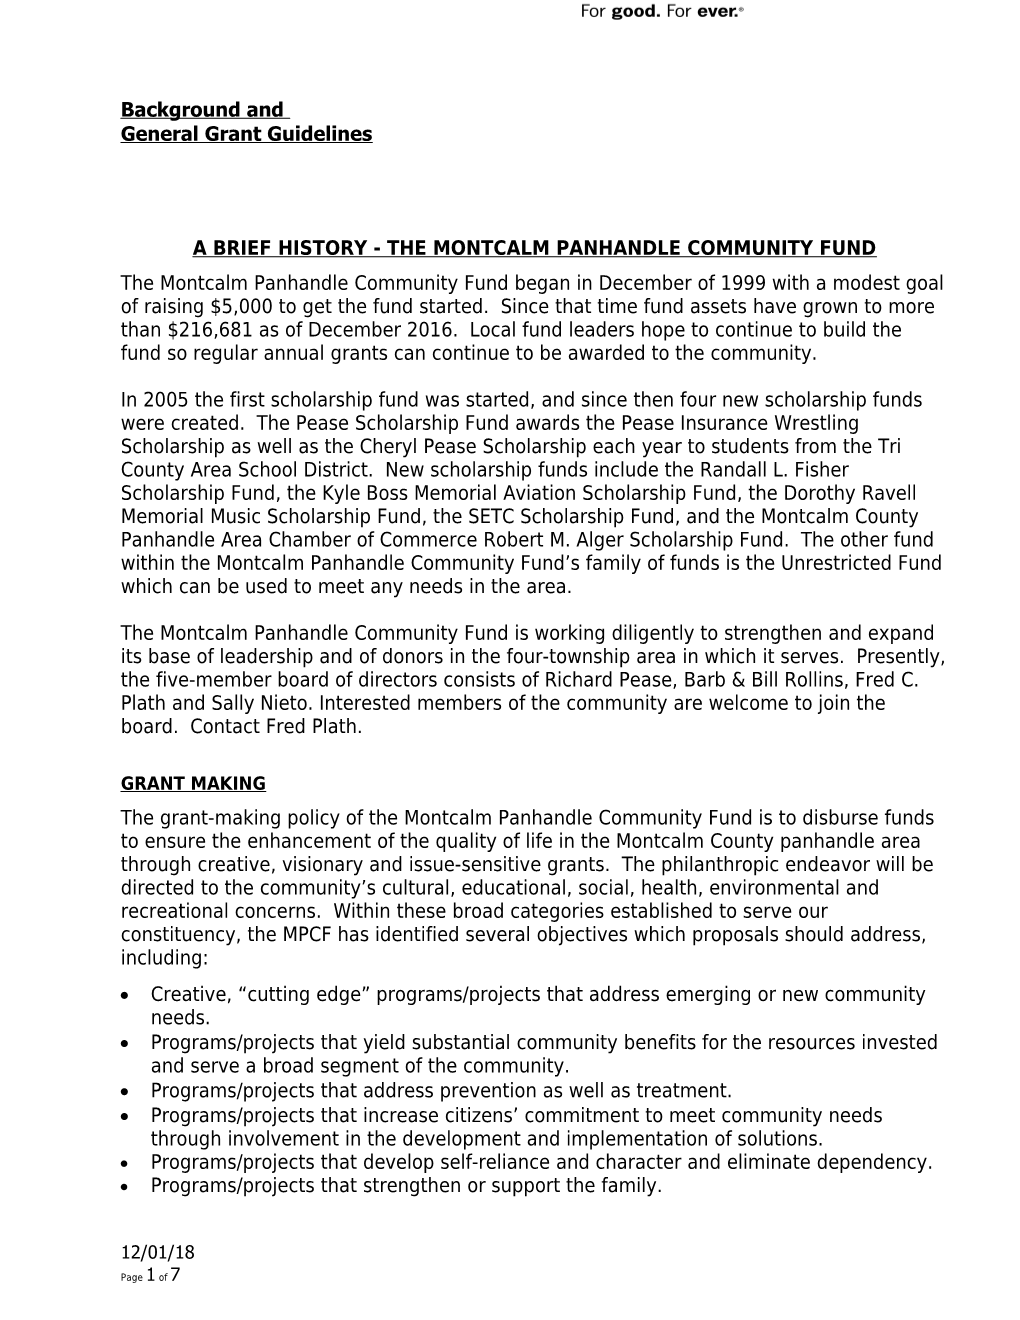 A Brief History - the Montcalm Panhandle Community Fund